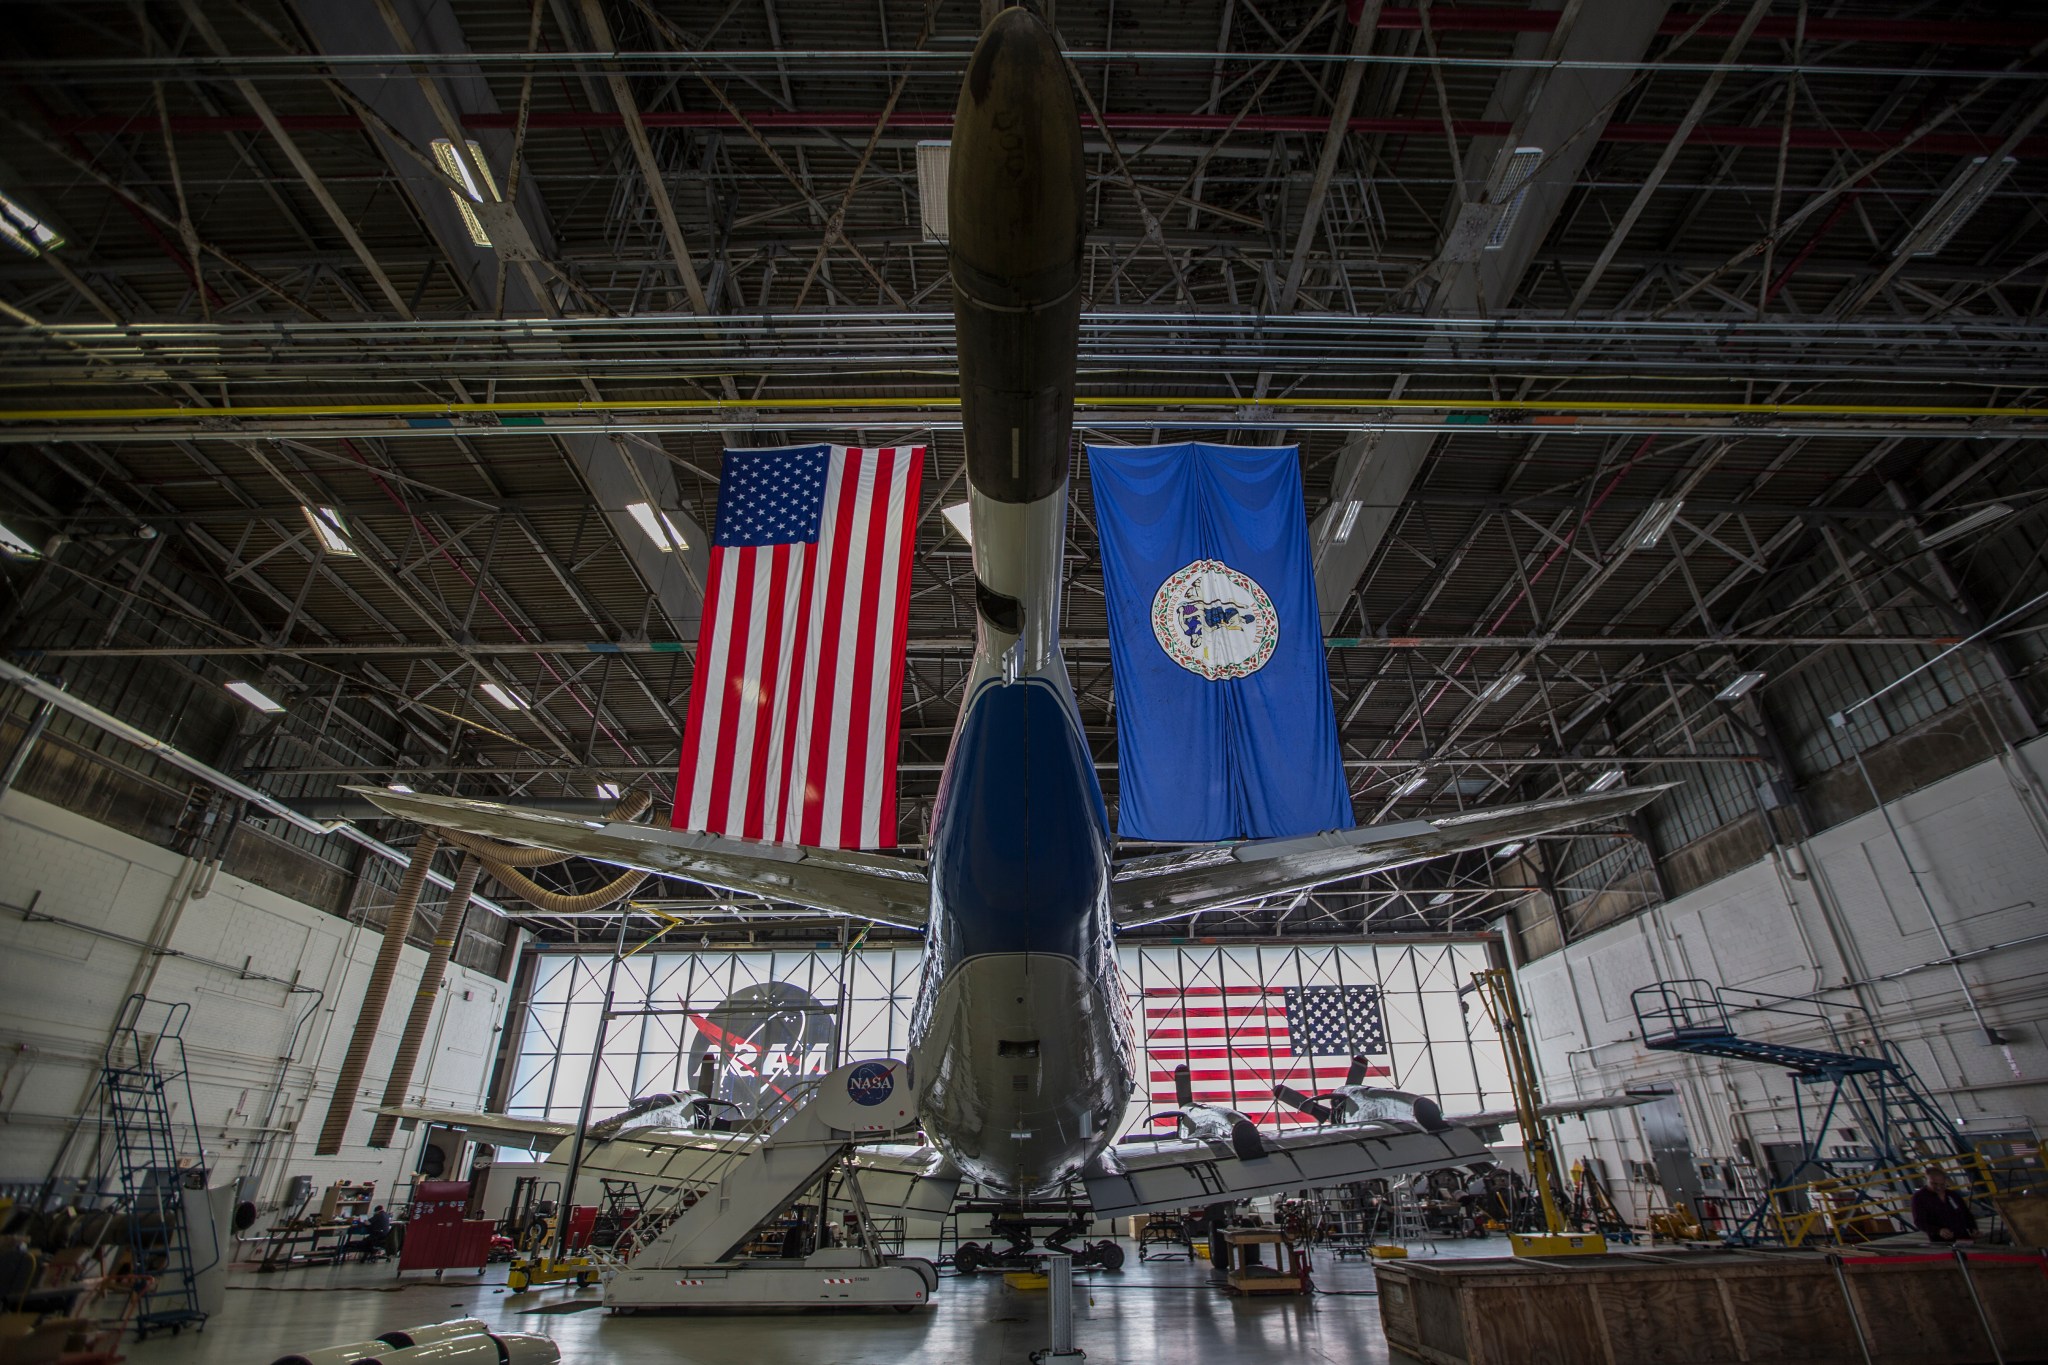 The back end of the P-3 aircraft inside of a plane hangar. Above the plane hangs an American Flag and Virginia state flag.